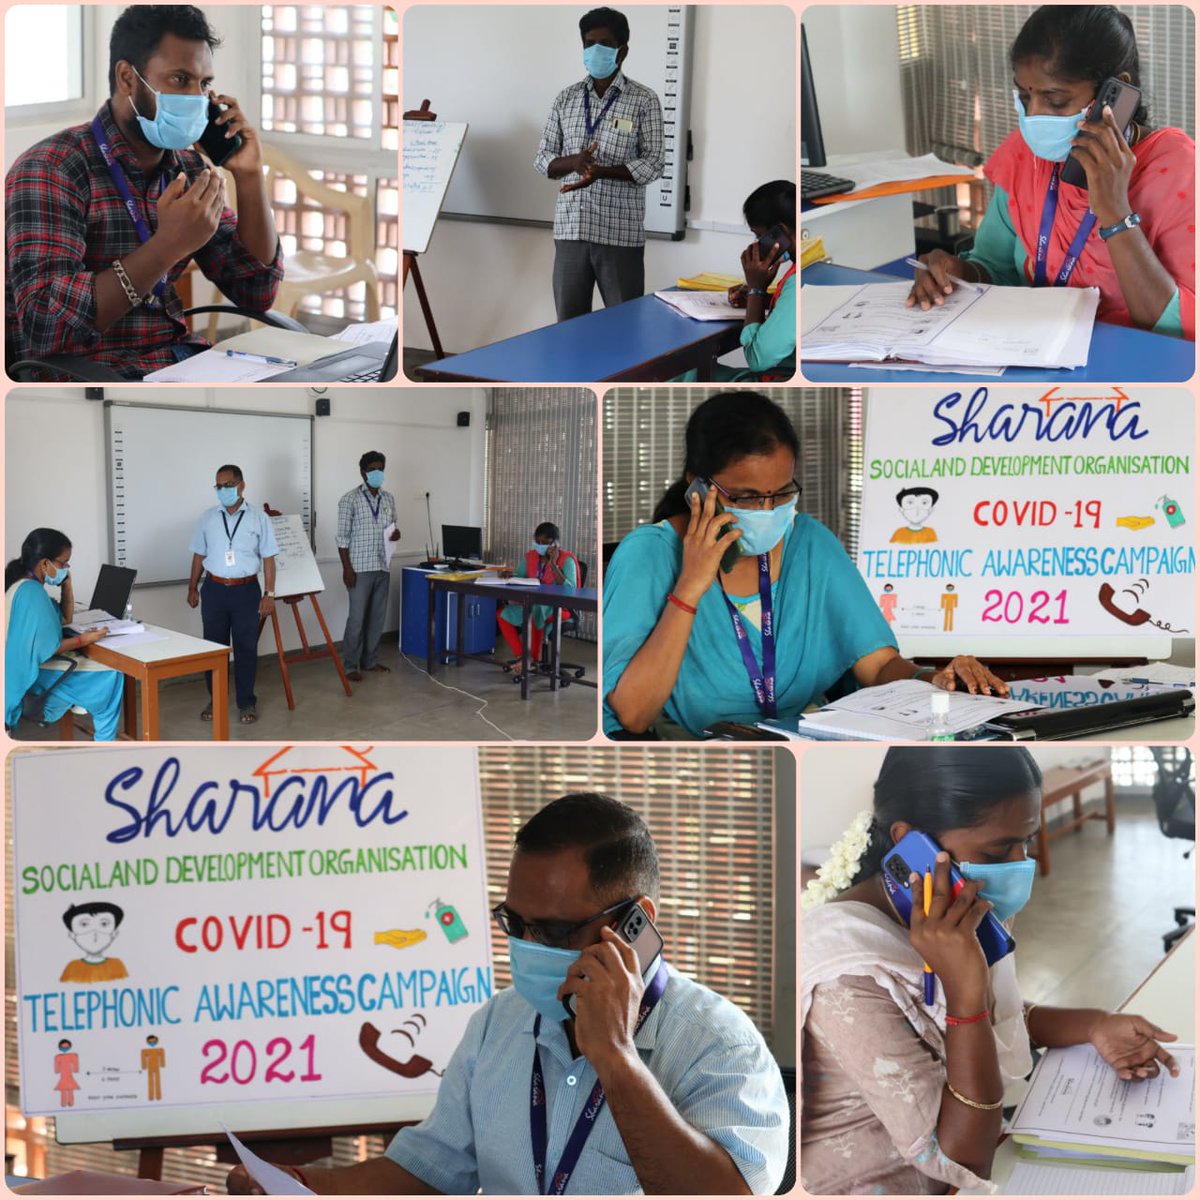 We’ve begun 2 huge telephonic awareness campaigns, one urban and one rural. Our team of social workers is calling up families we support, one by one, checking on their health and creating awareness on hygiene, safety, and best practices. #StaySafe  #IndiaFightsCorona  #secondwave